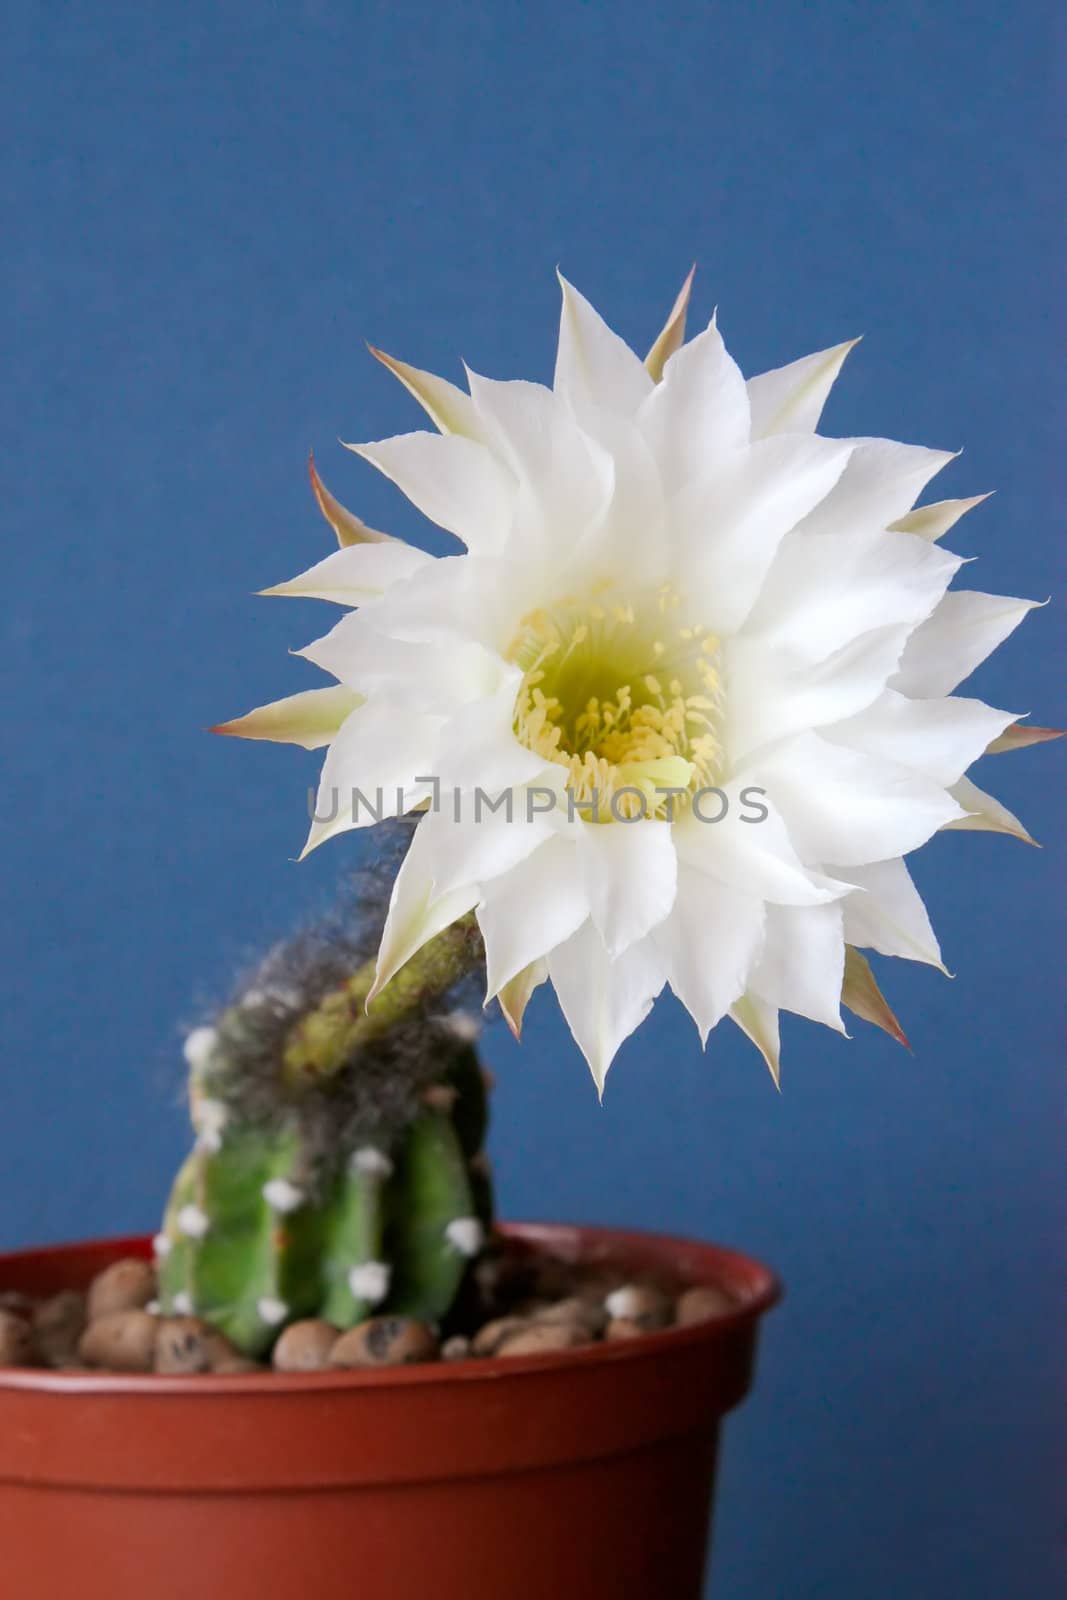 Cactus with blossoms on dark background (Echinopsis).Image with shallow depth of field.